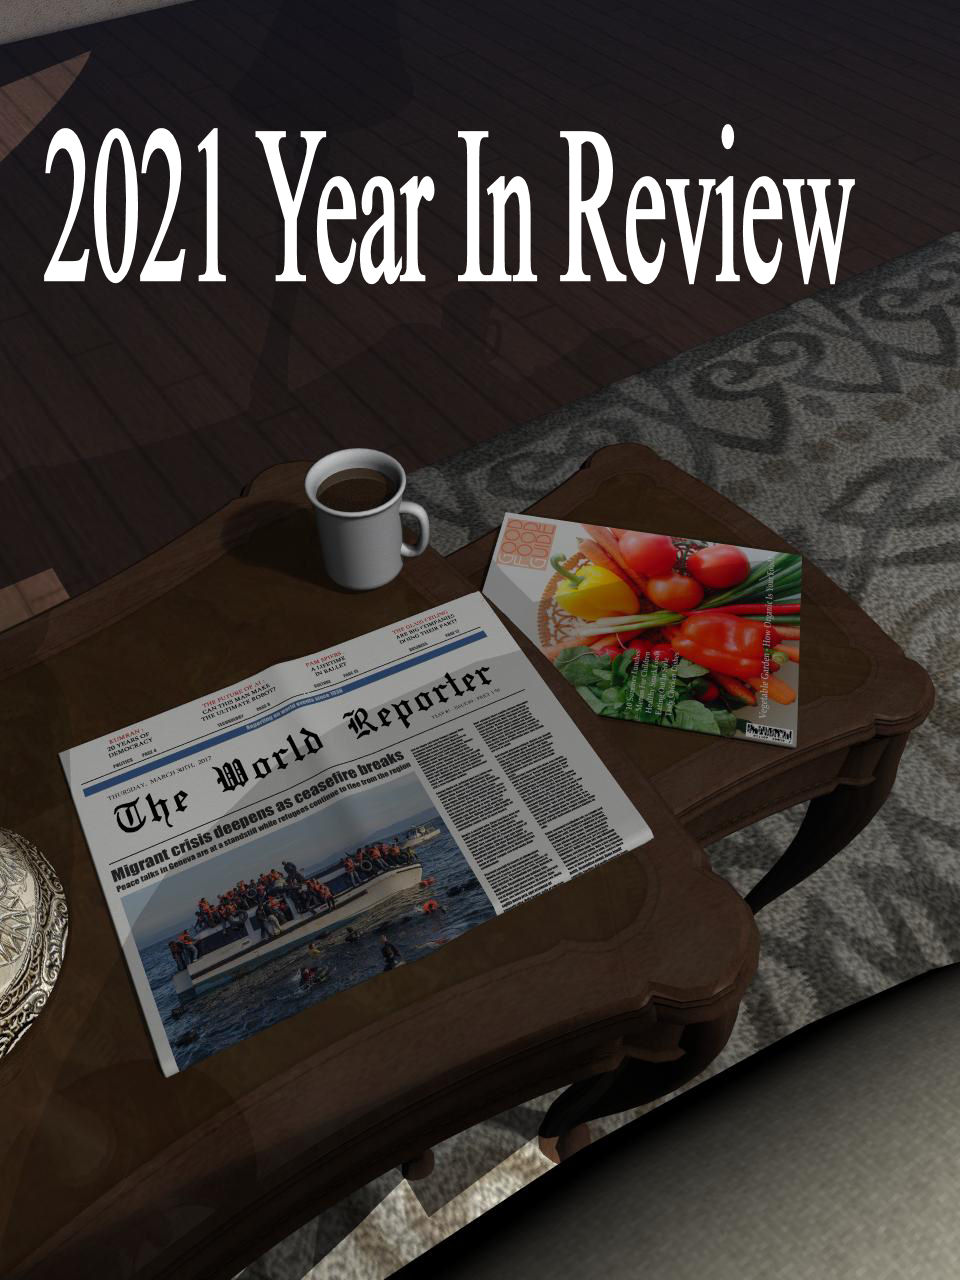 2021 A Year in Review